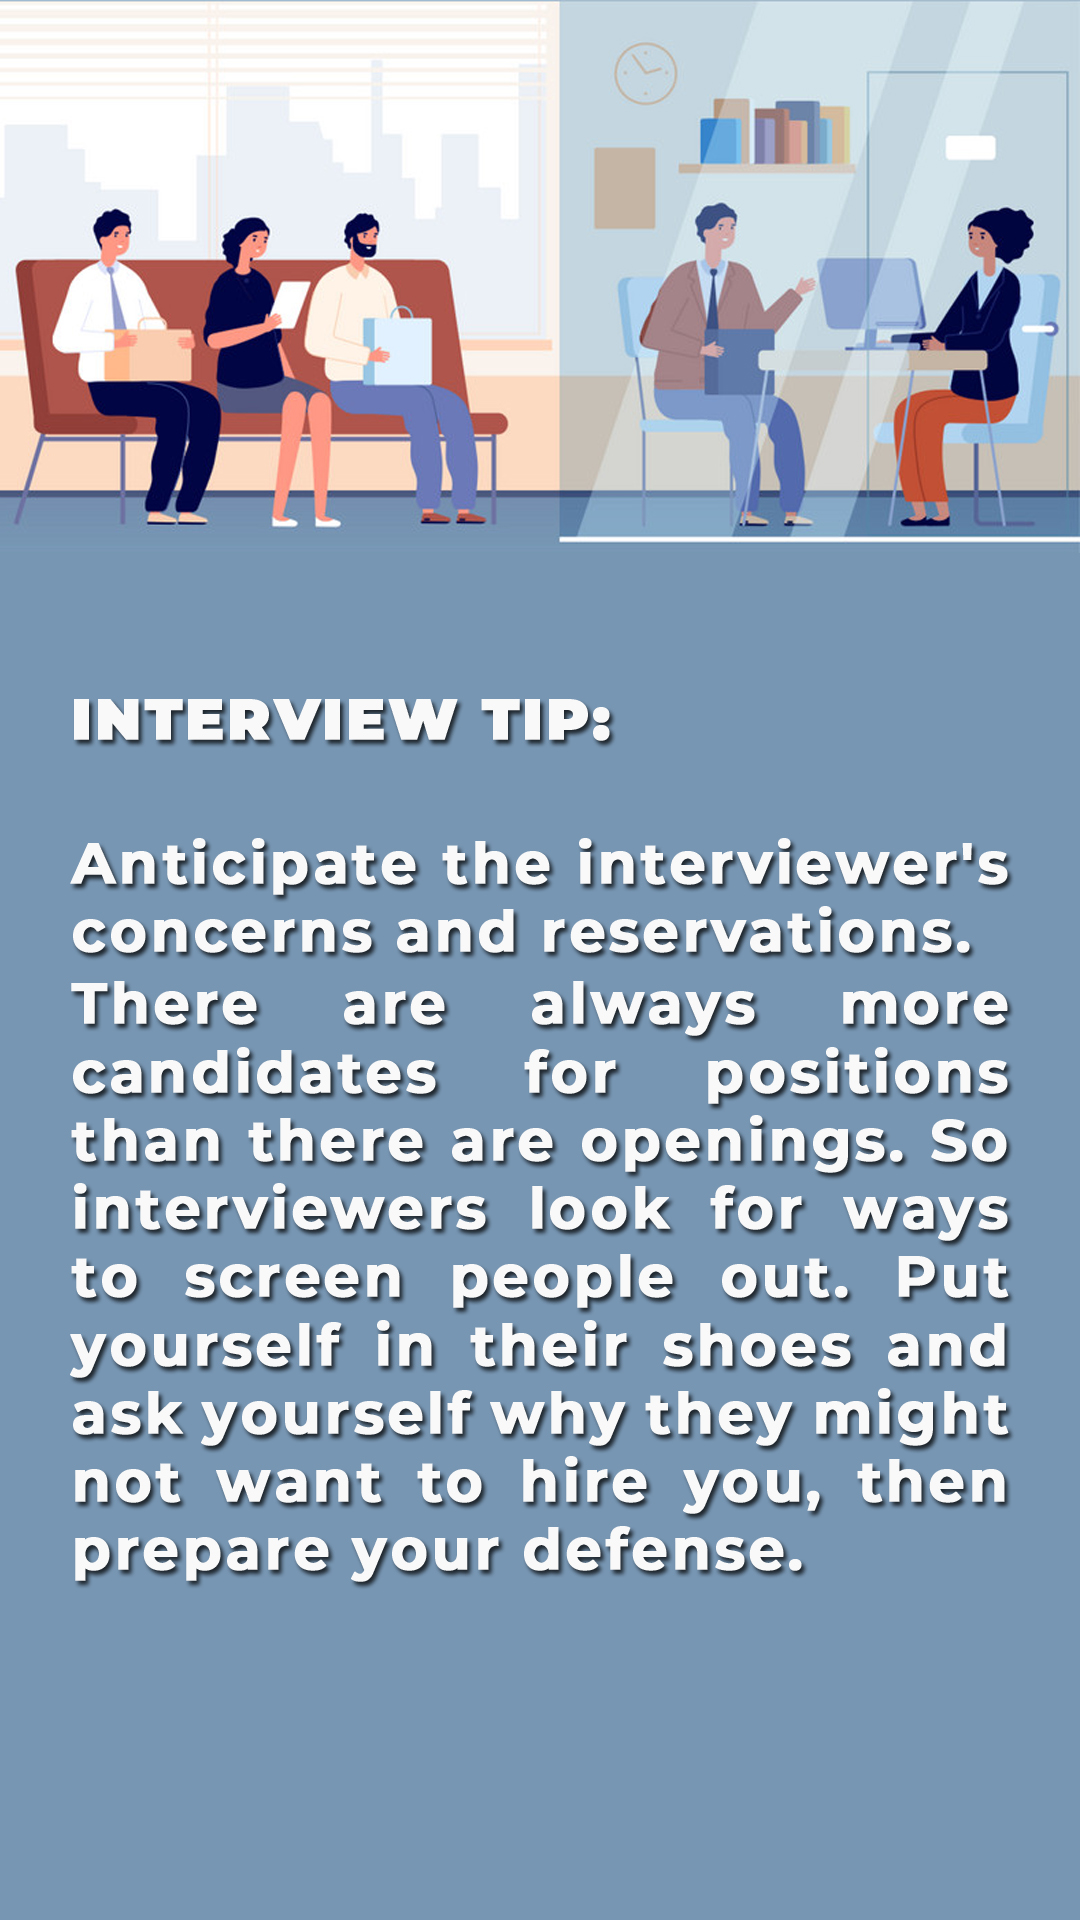 Anticipate the interviewer's concerns and reservations.